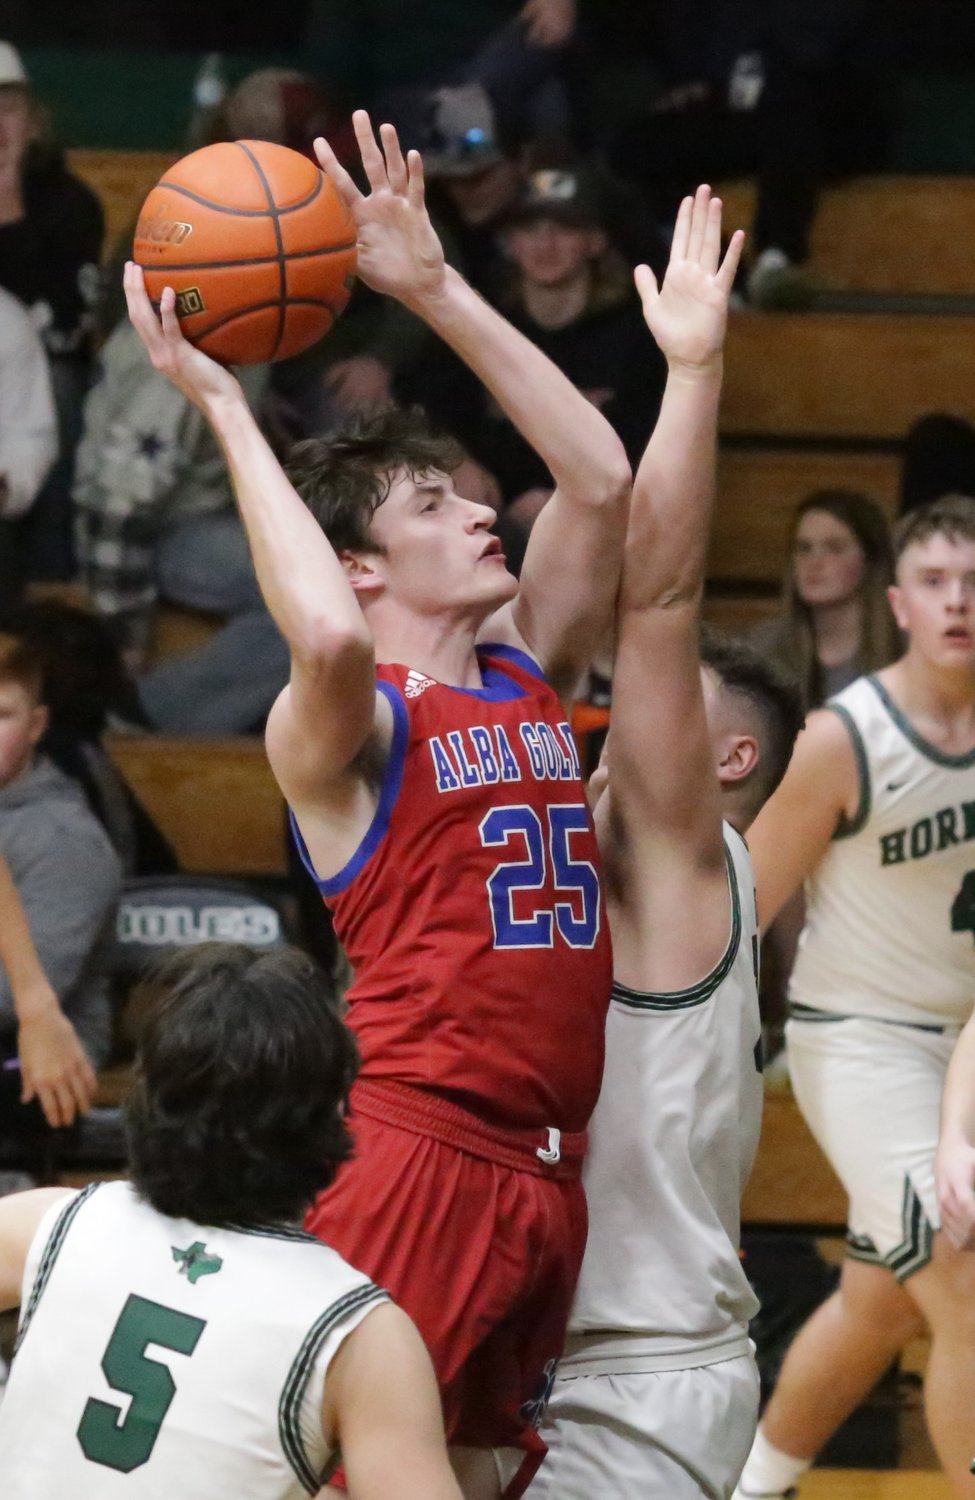 Alba-Golden’s Kaden Kennedy puts up a short jumper from the lane in action against Boles.